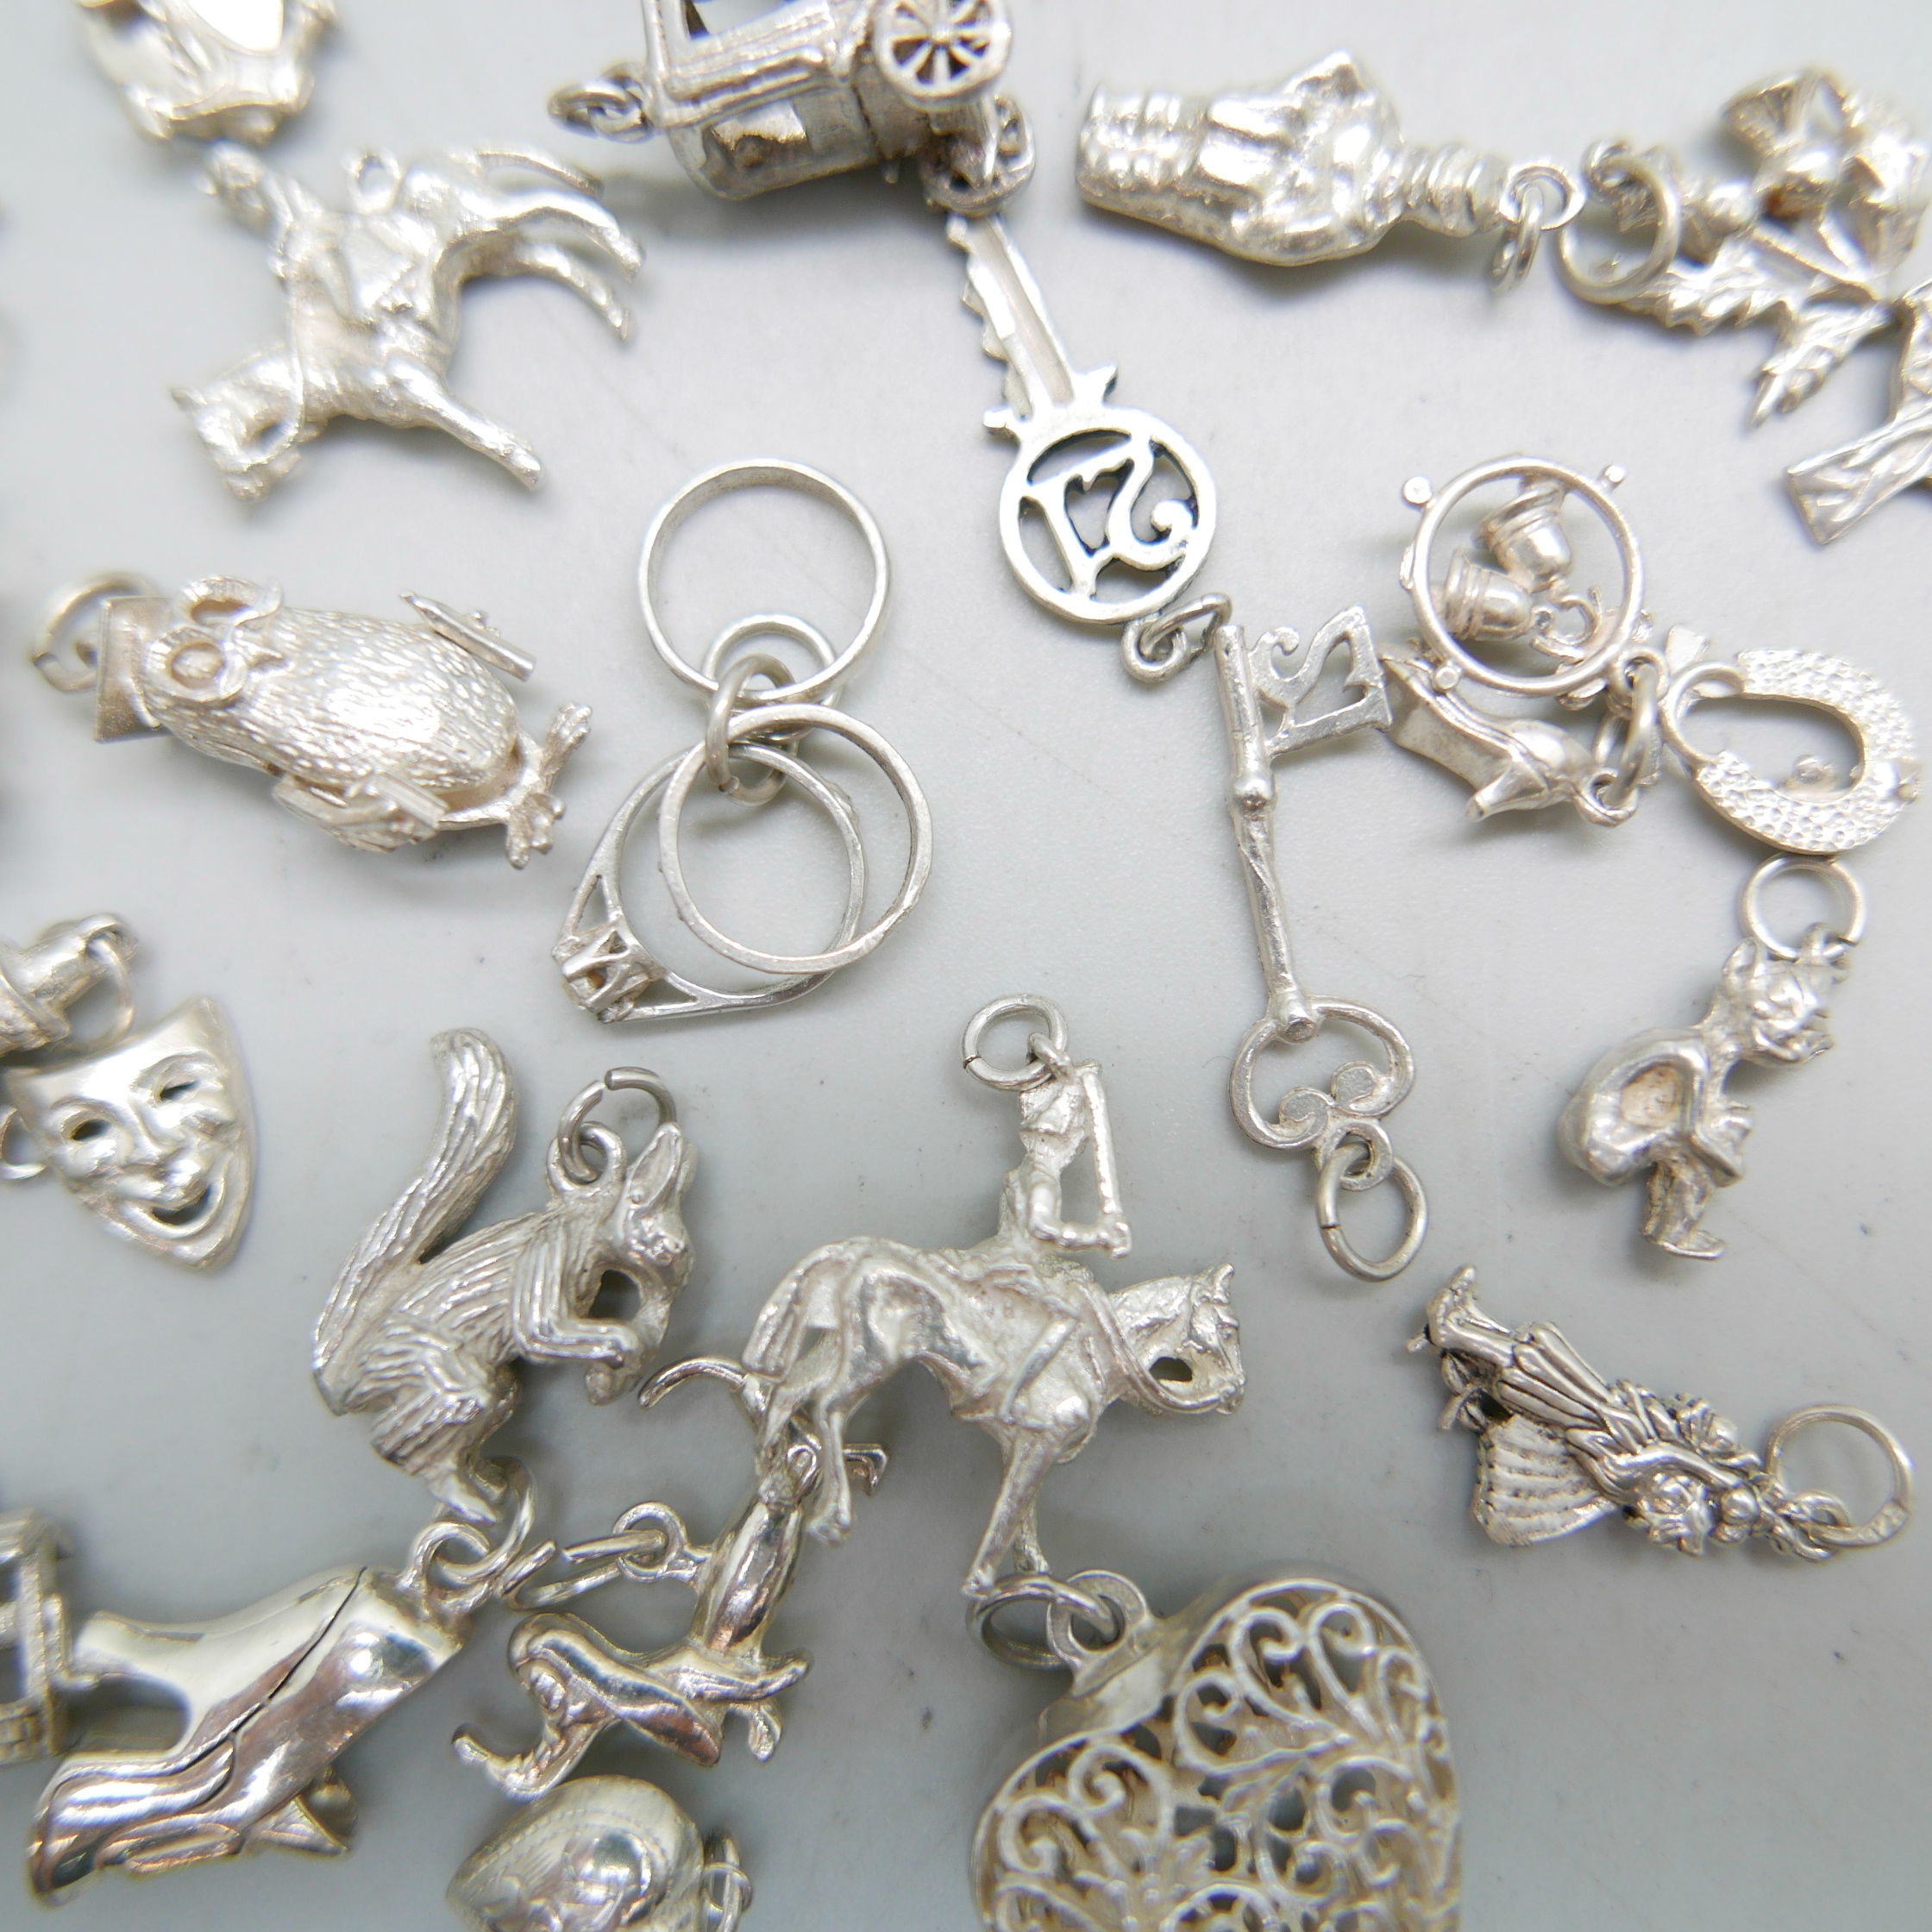 Twenty-four silver charms, 50g - Image 2 of 2